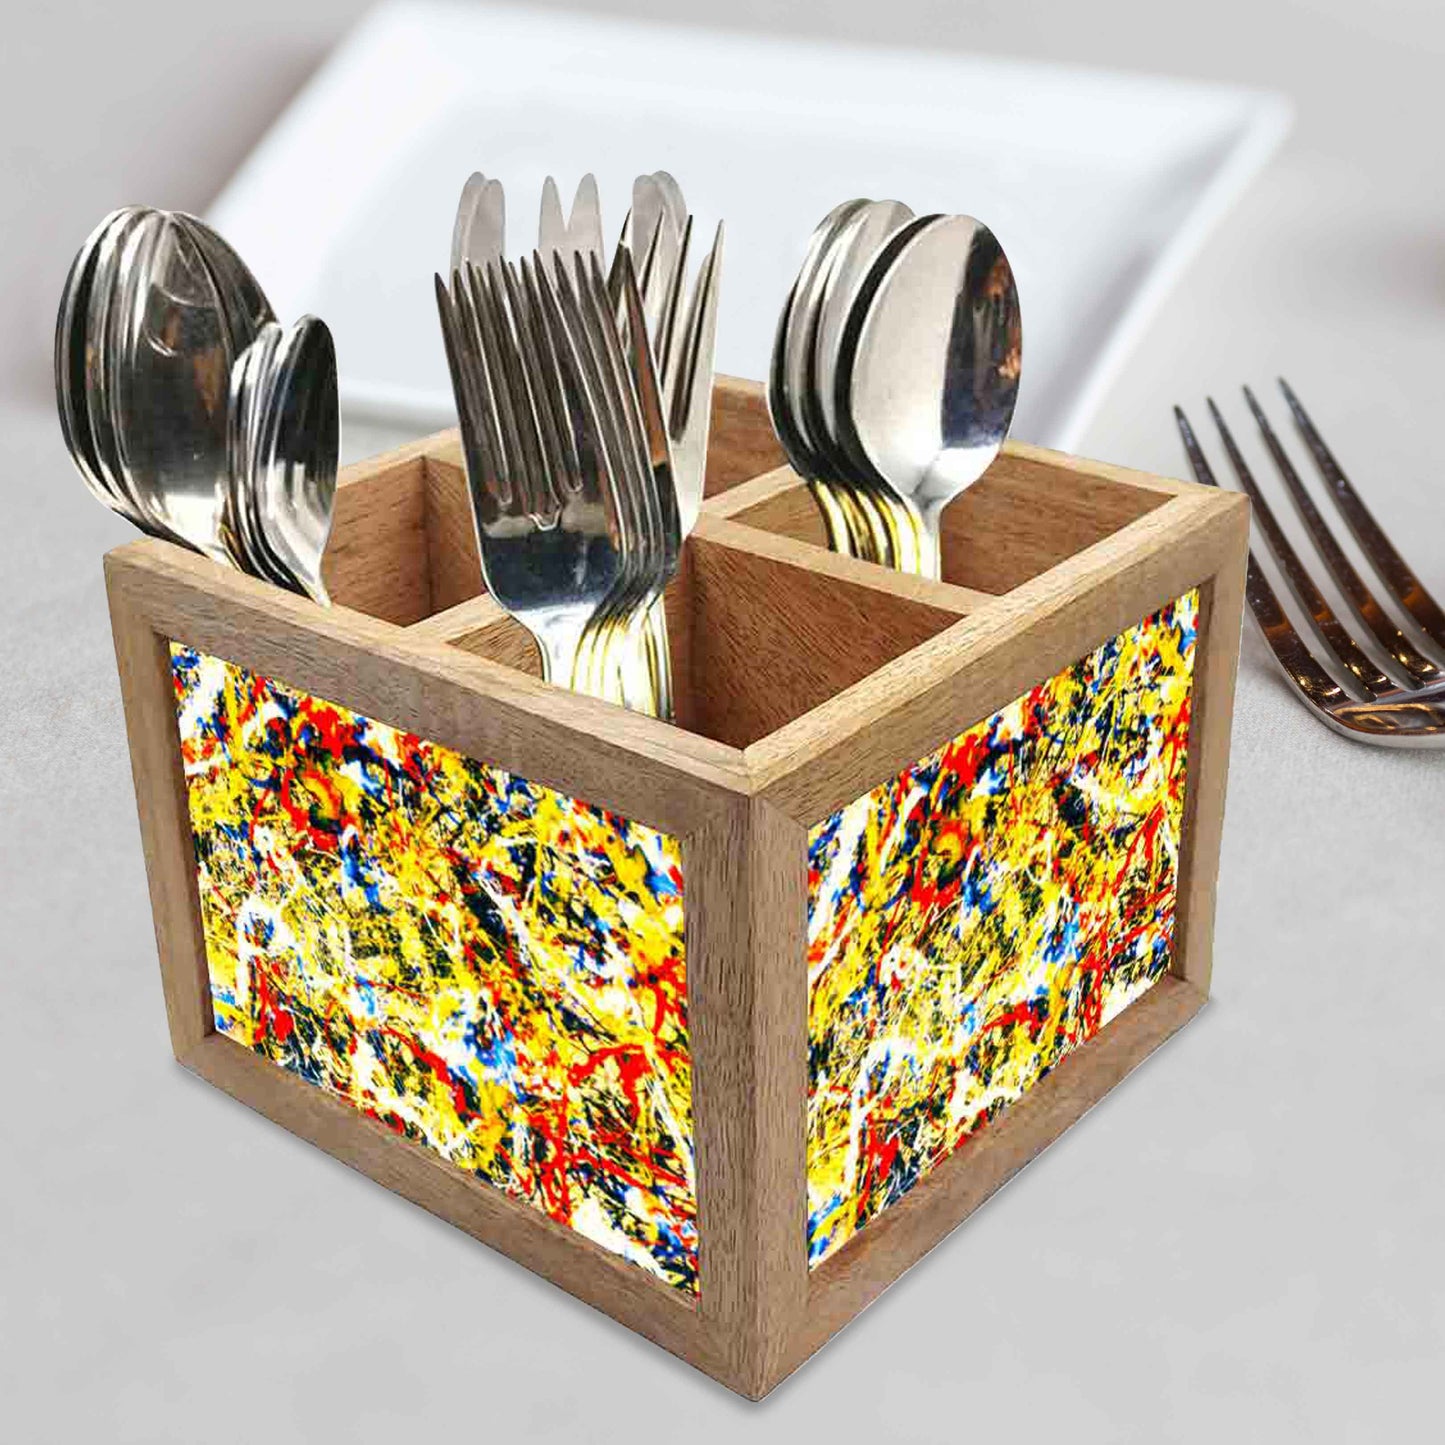 Pollock Cutlery Holder Stand Silverware Caddy Organizer for Spoons, Forks & Knives-Made of Pinewood